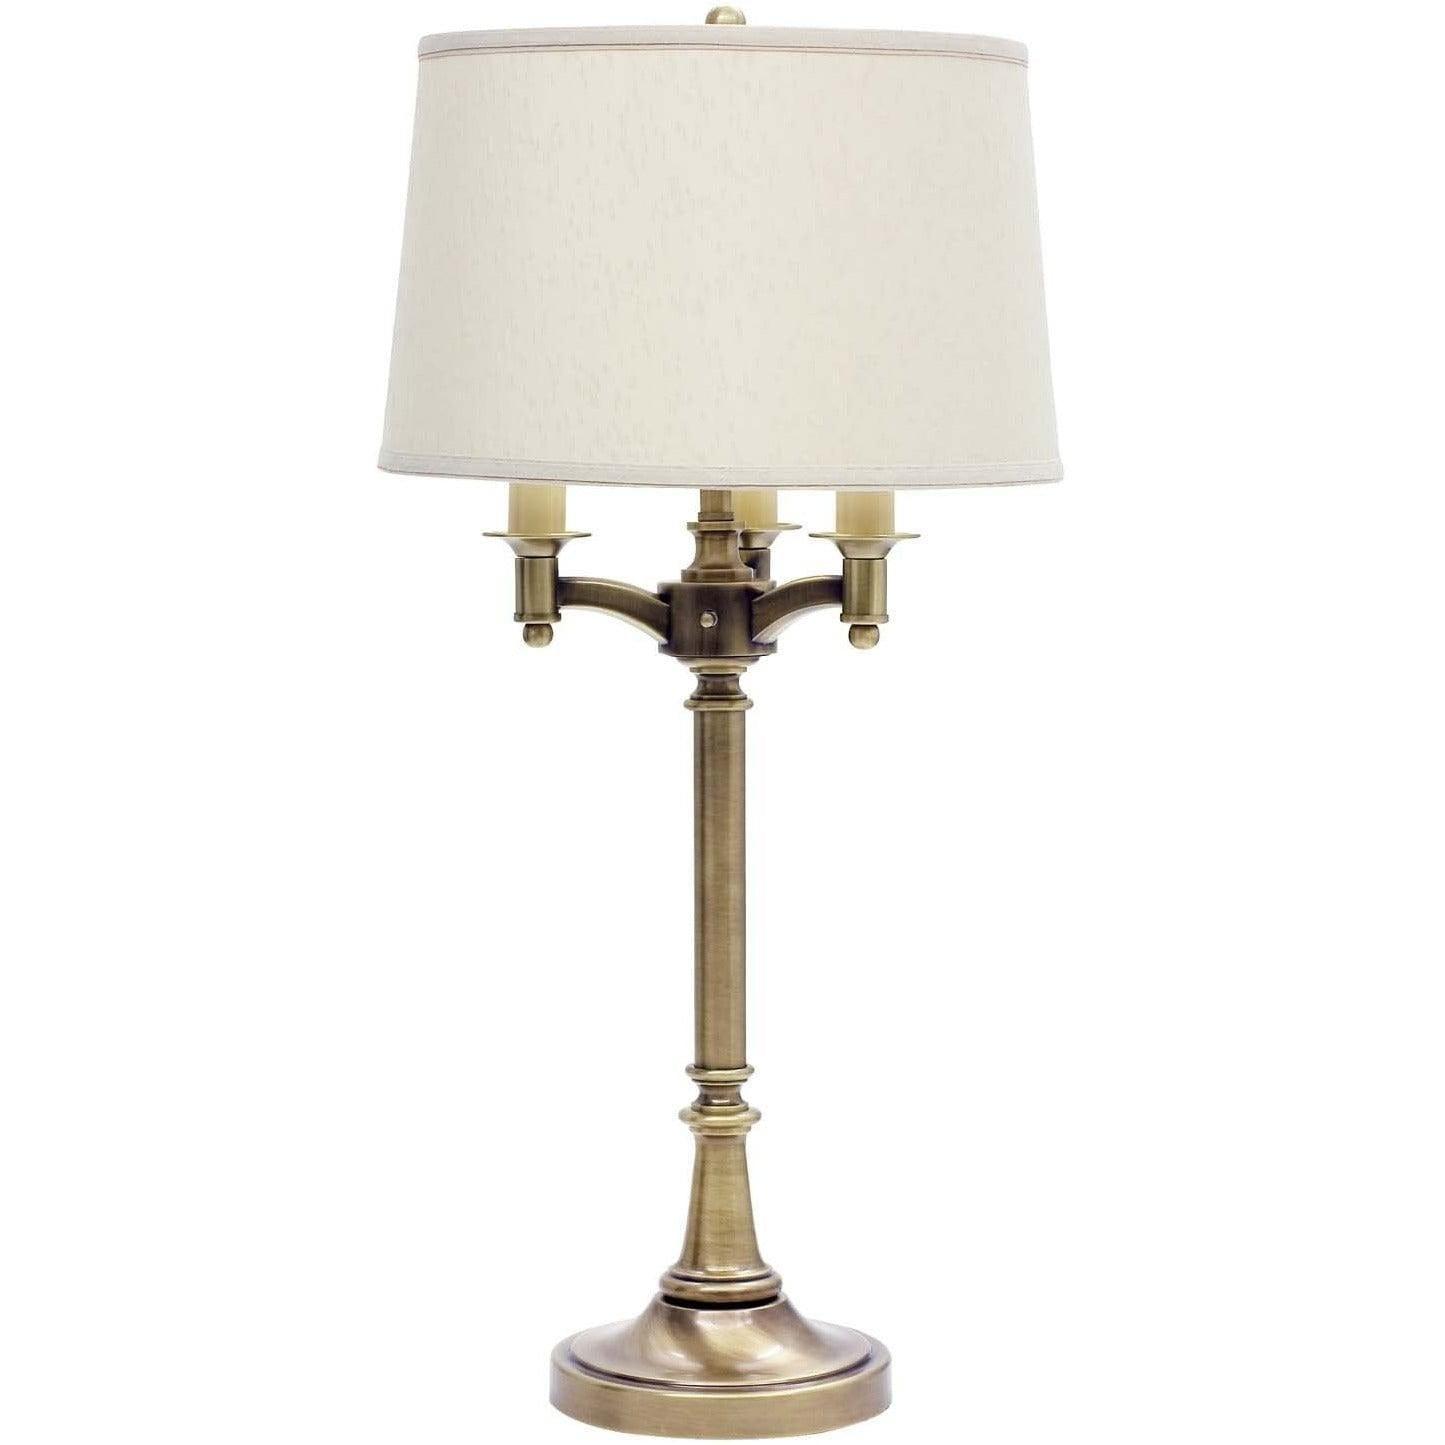 House of Troy - Lancaster Four Light Table Lamp - L850-AB | Montreal Lighting & Hardware